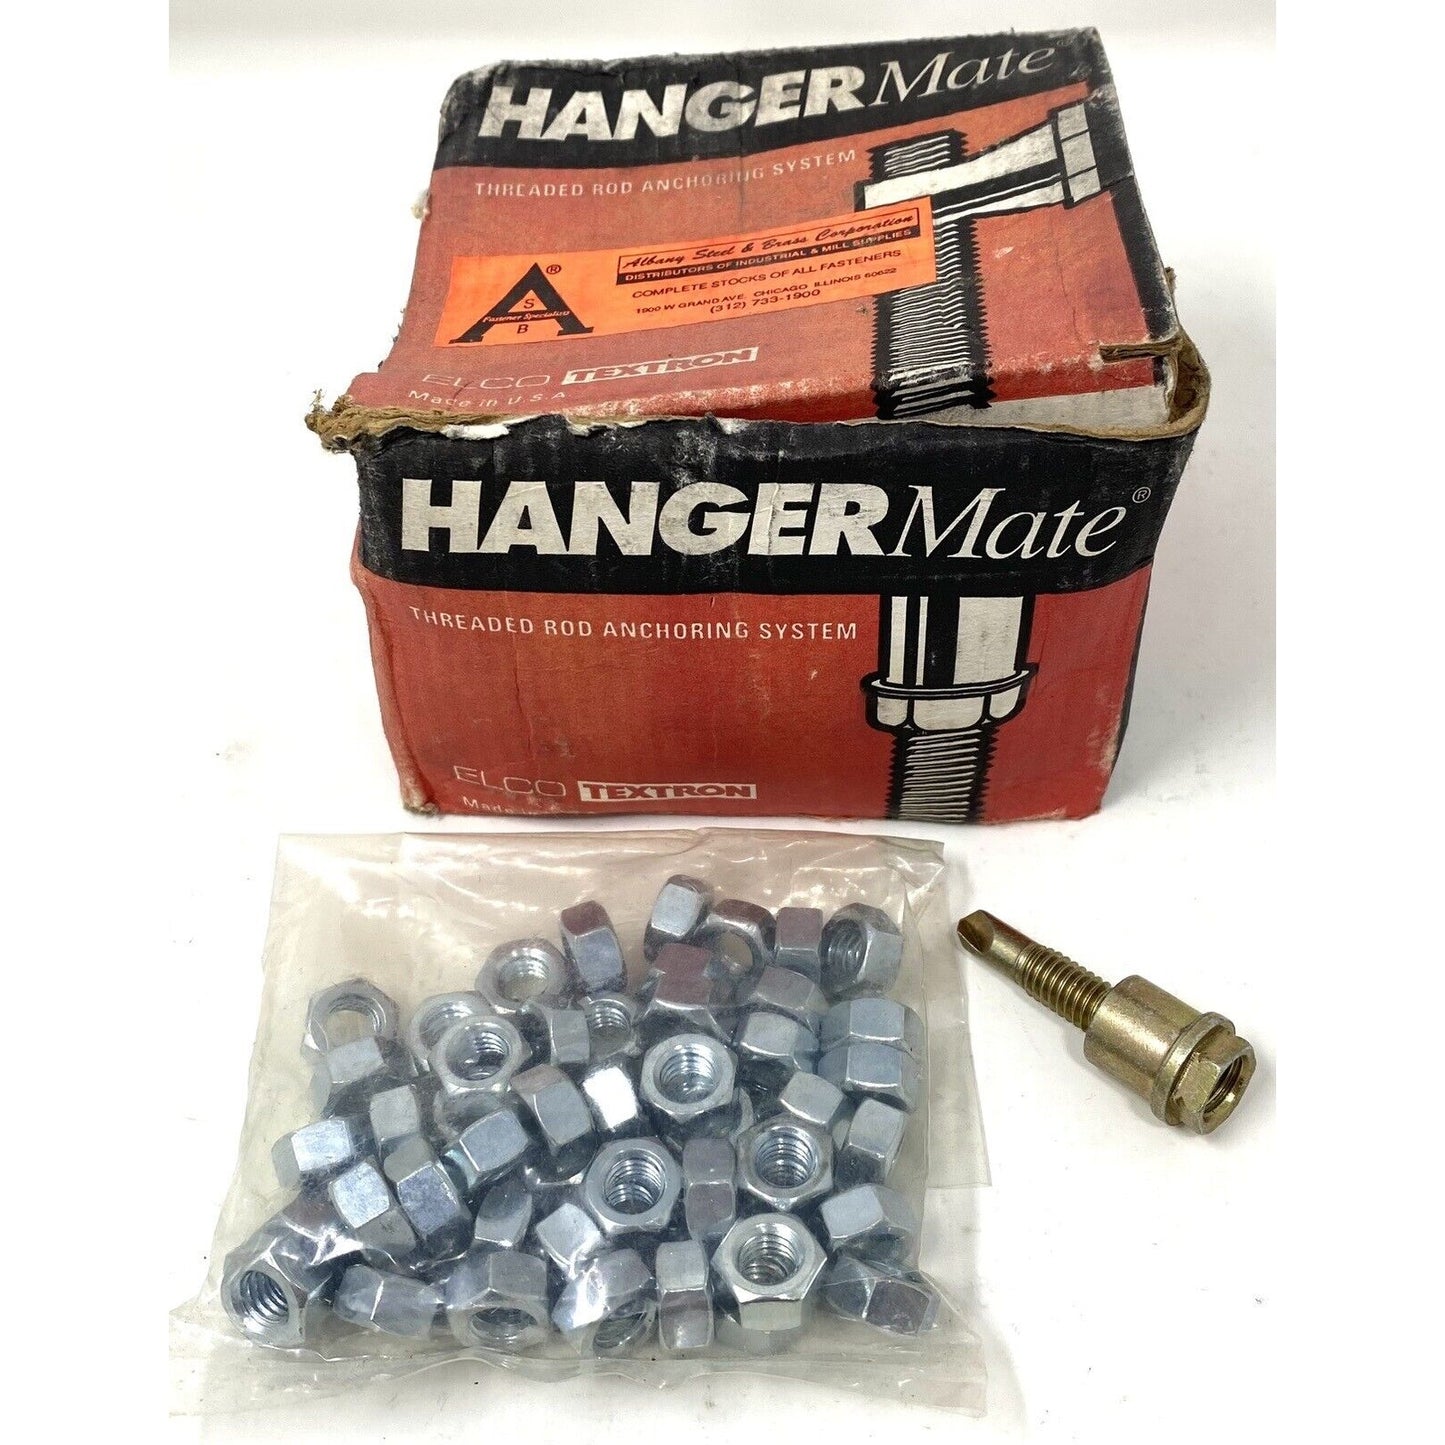 Hangermate Self Drilling Anchor Internally Threaded Metal Purl In 3/8"-16 Rod